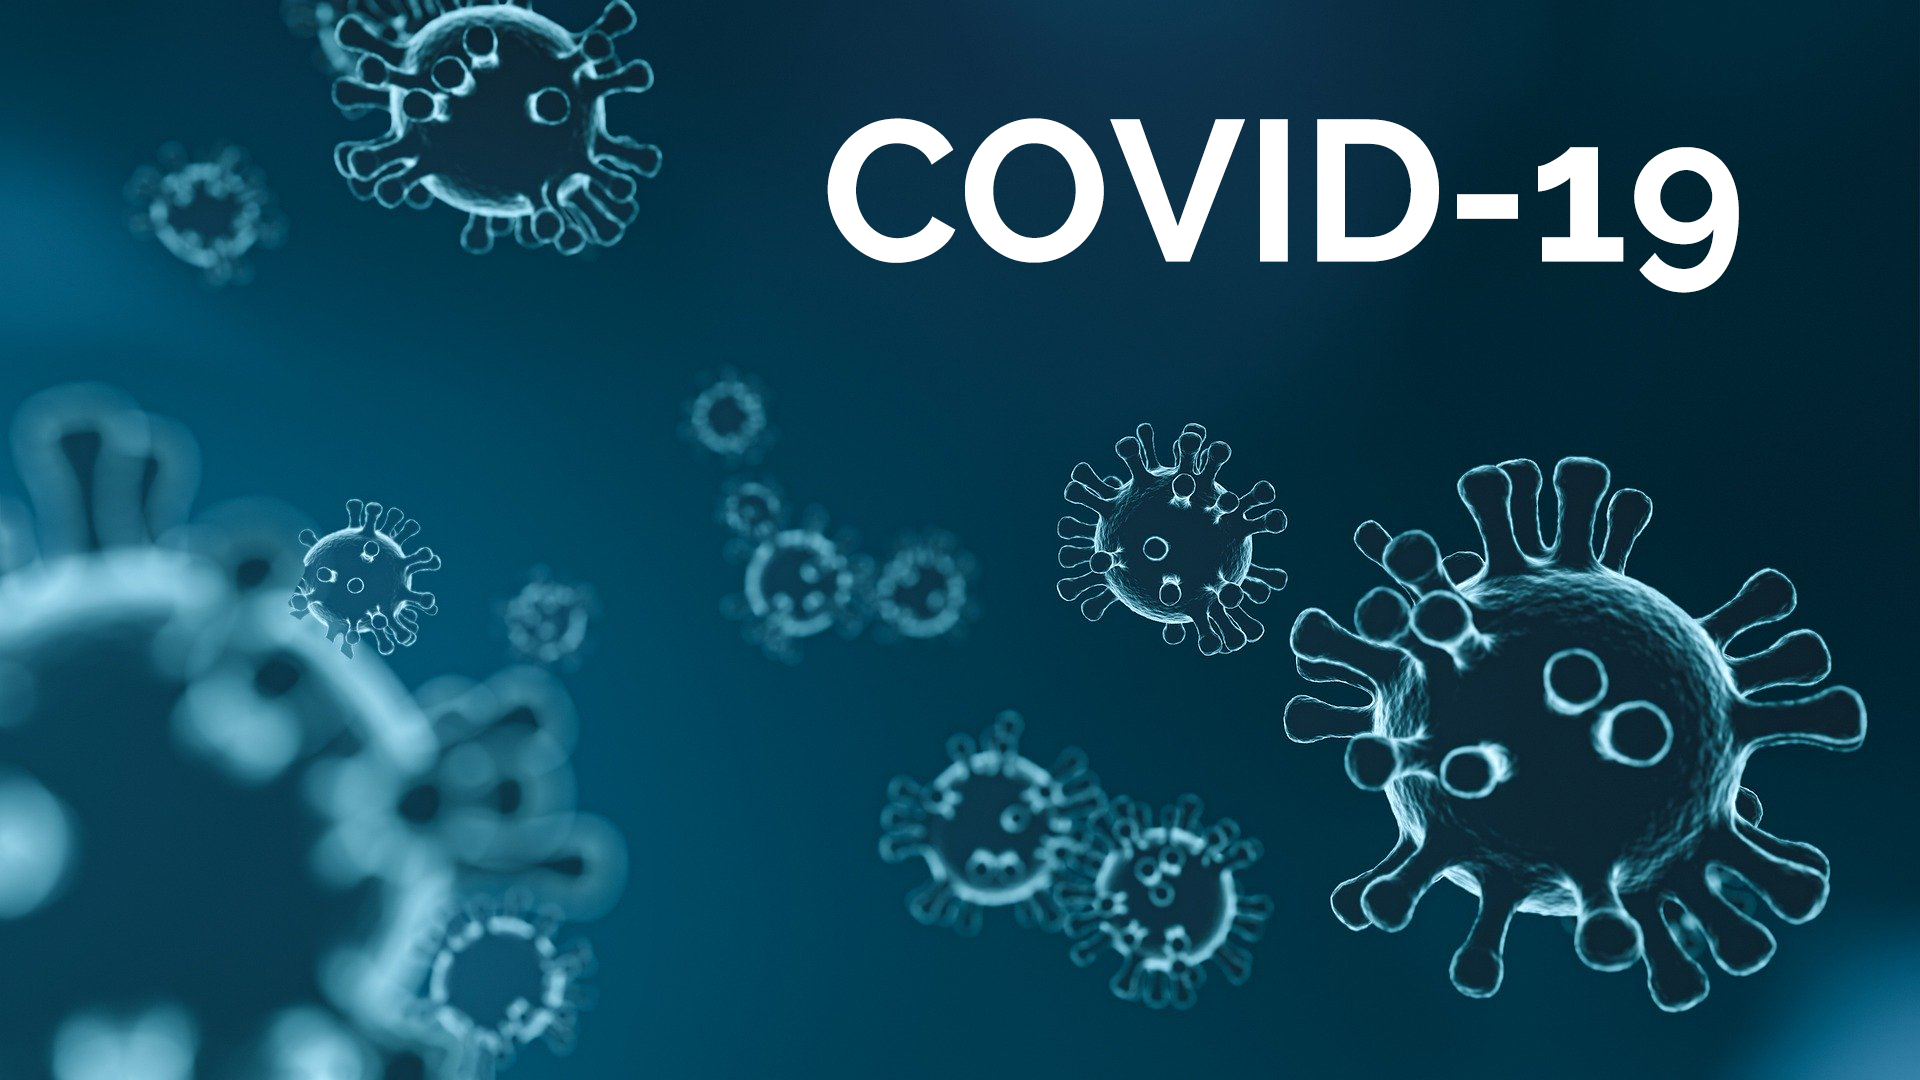 Cornwall Covid Update Letter 23/23/23 - Apart Together, Vol. 23 With Regard To Virus Powerpoint Template Free Download